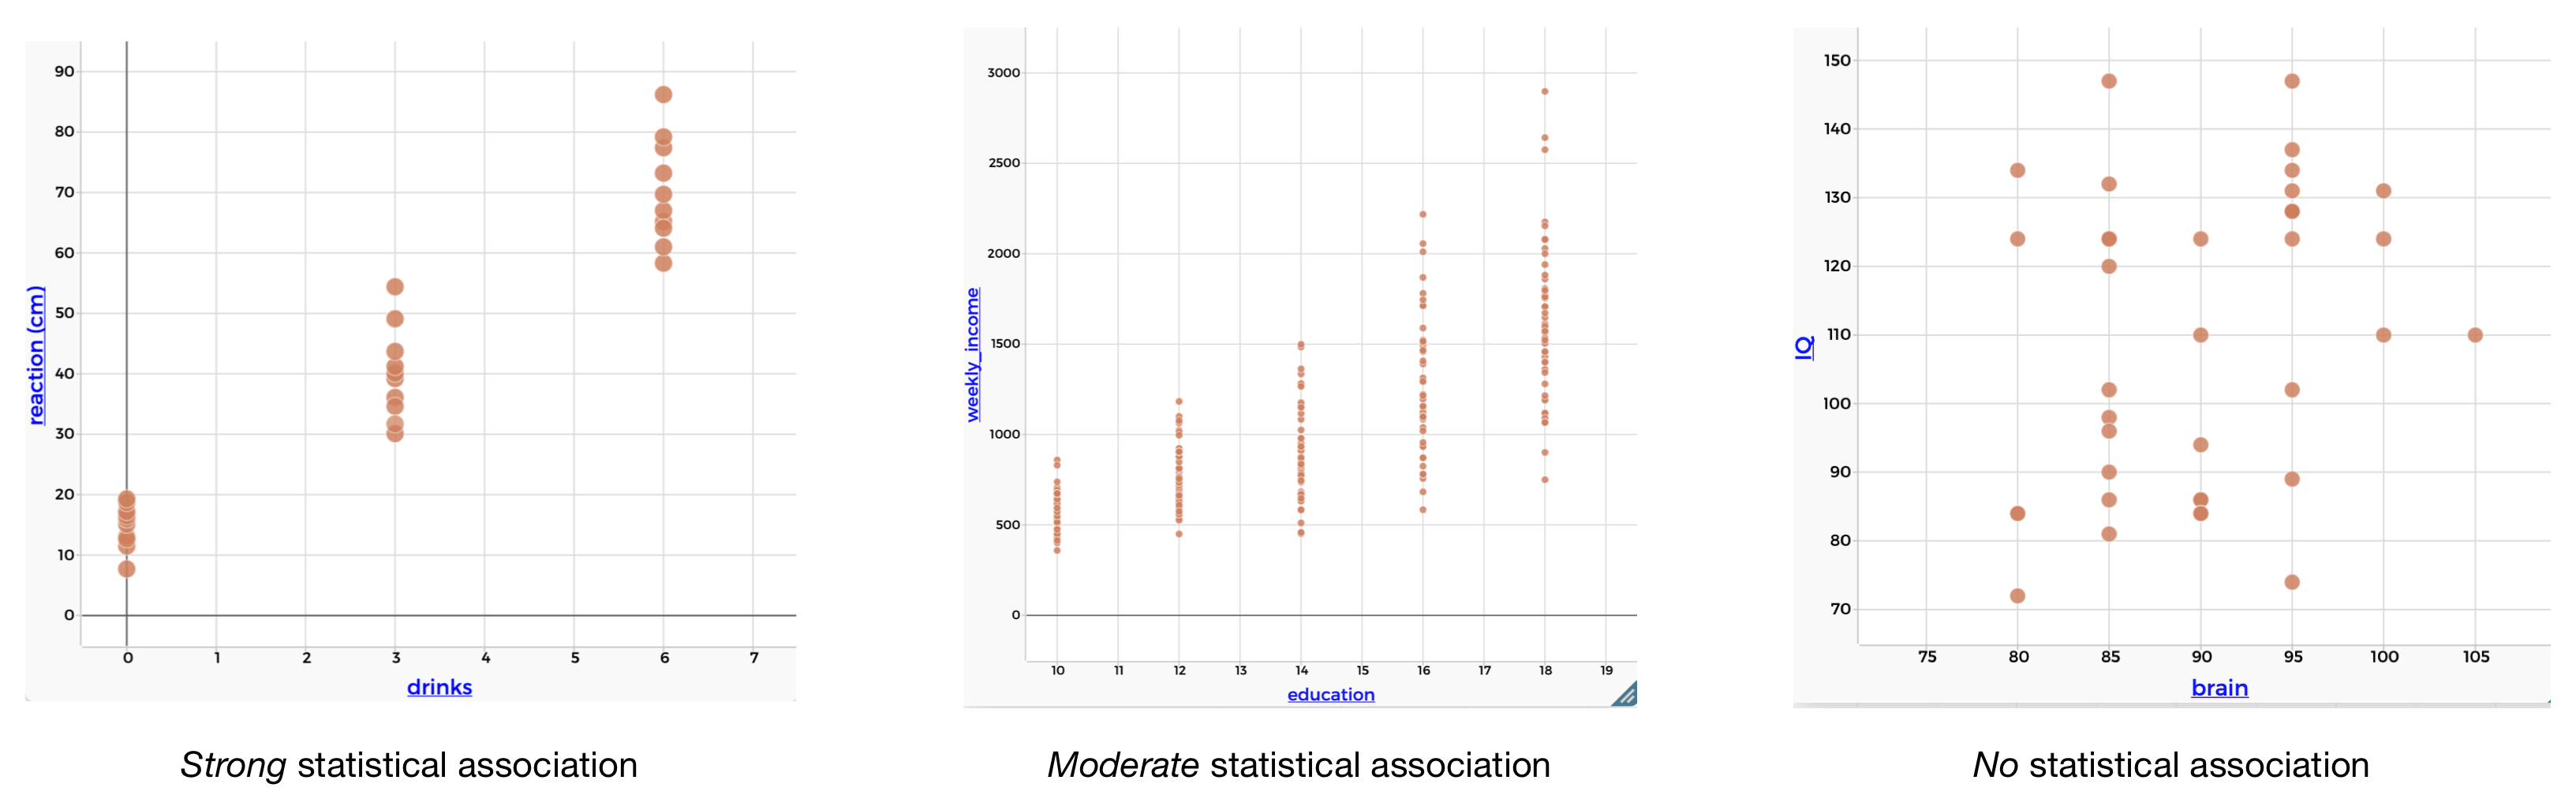 Scatterplots showing different *strengths* of statistical association